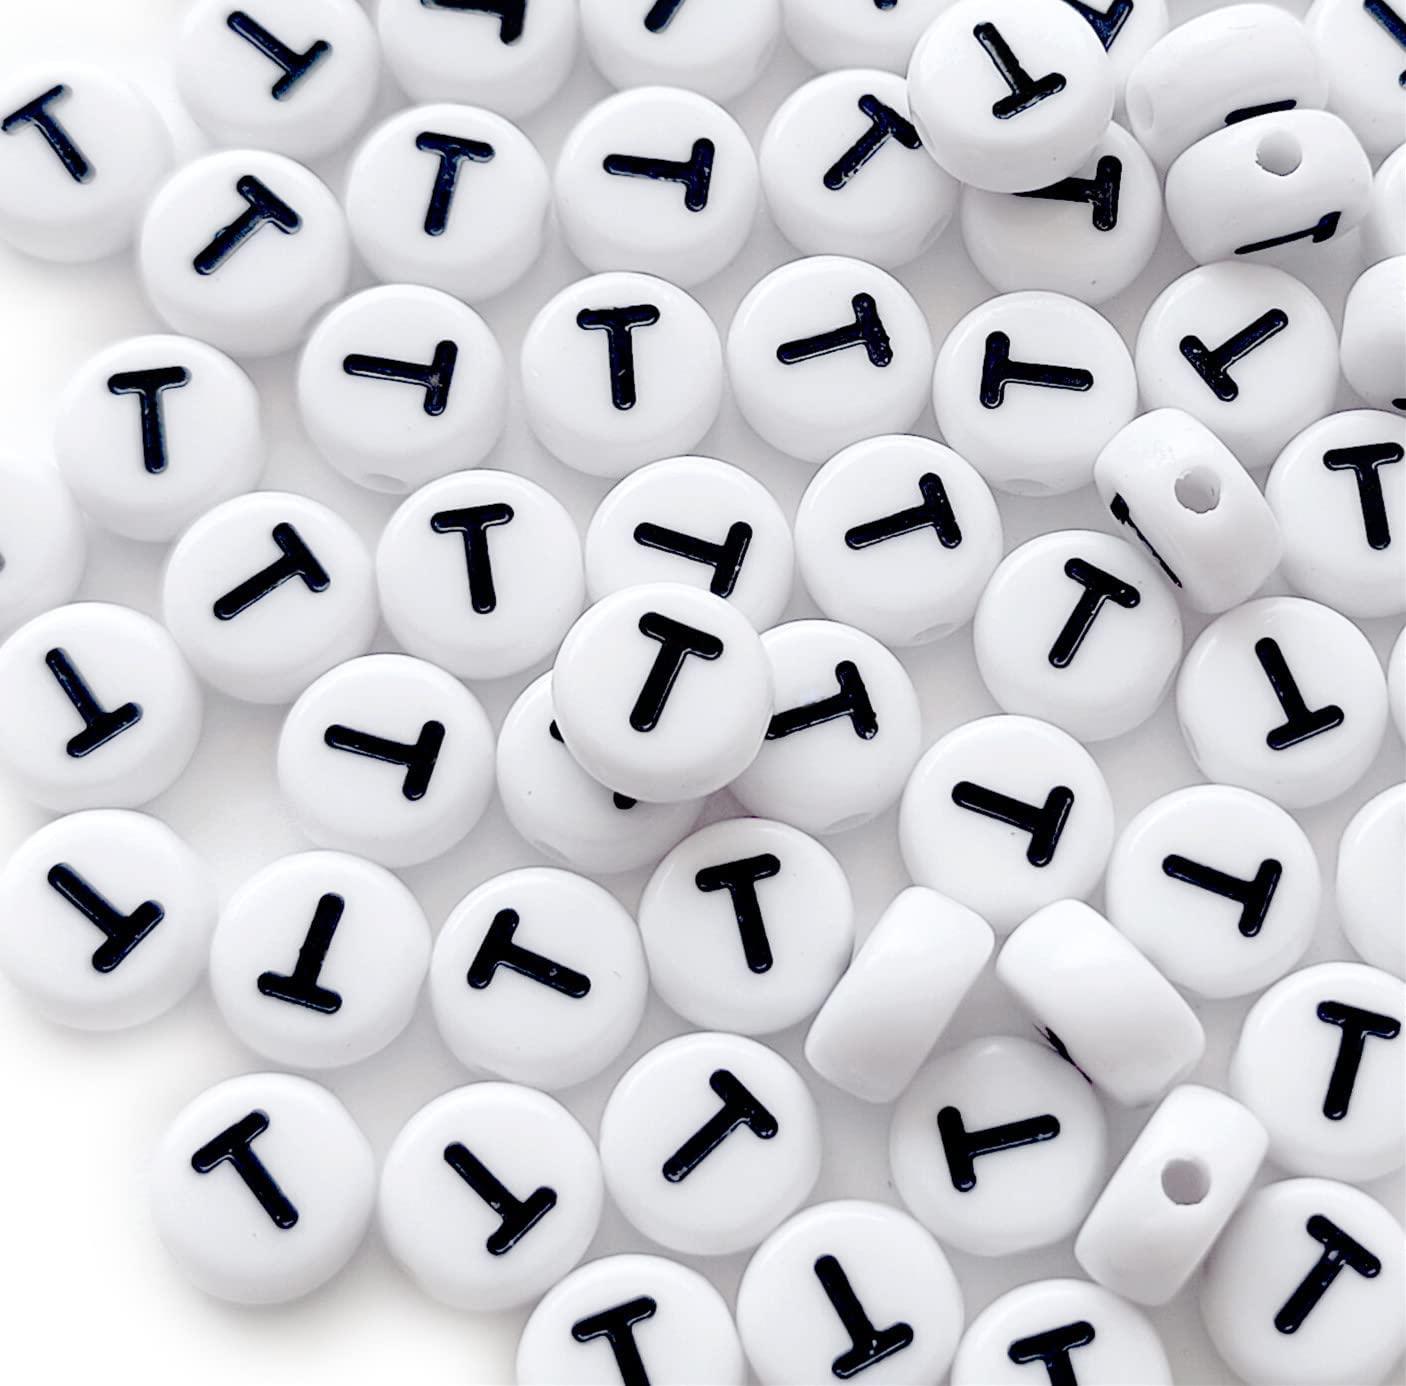 Trimming Shop Acrylic White Letter Beads with Black Alphabet A to Z Cube  for Key Chains, 100pcs 